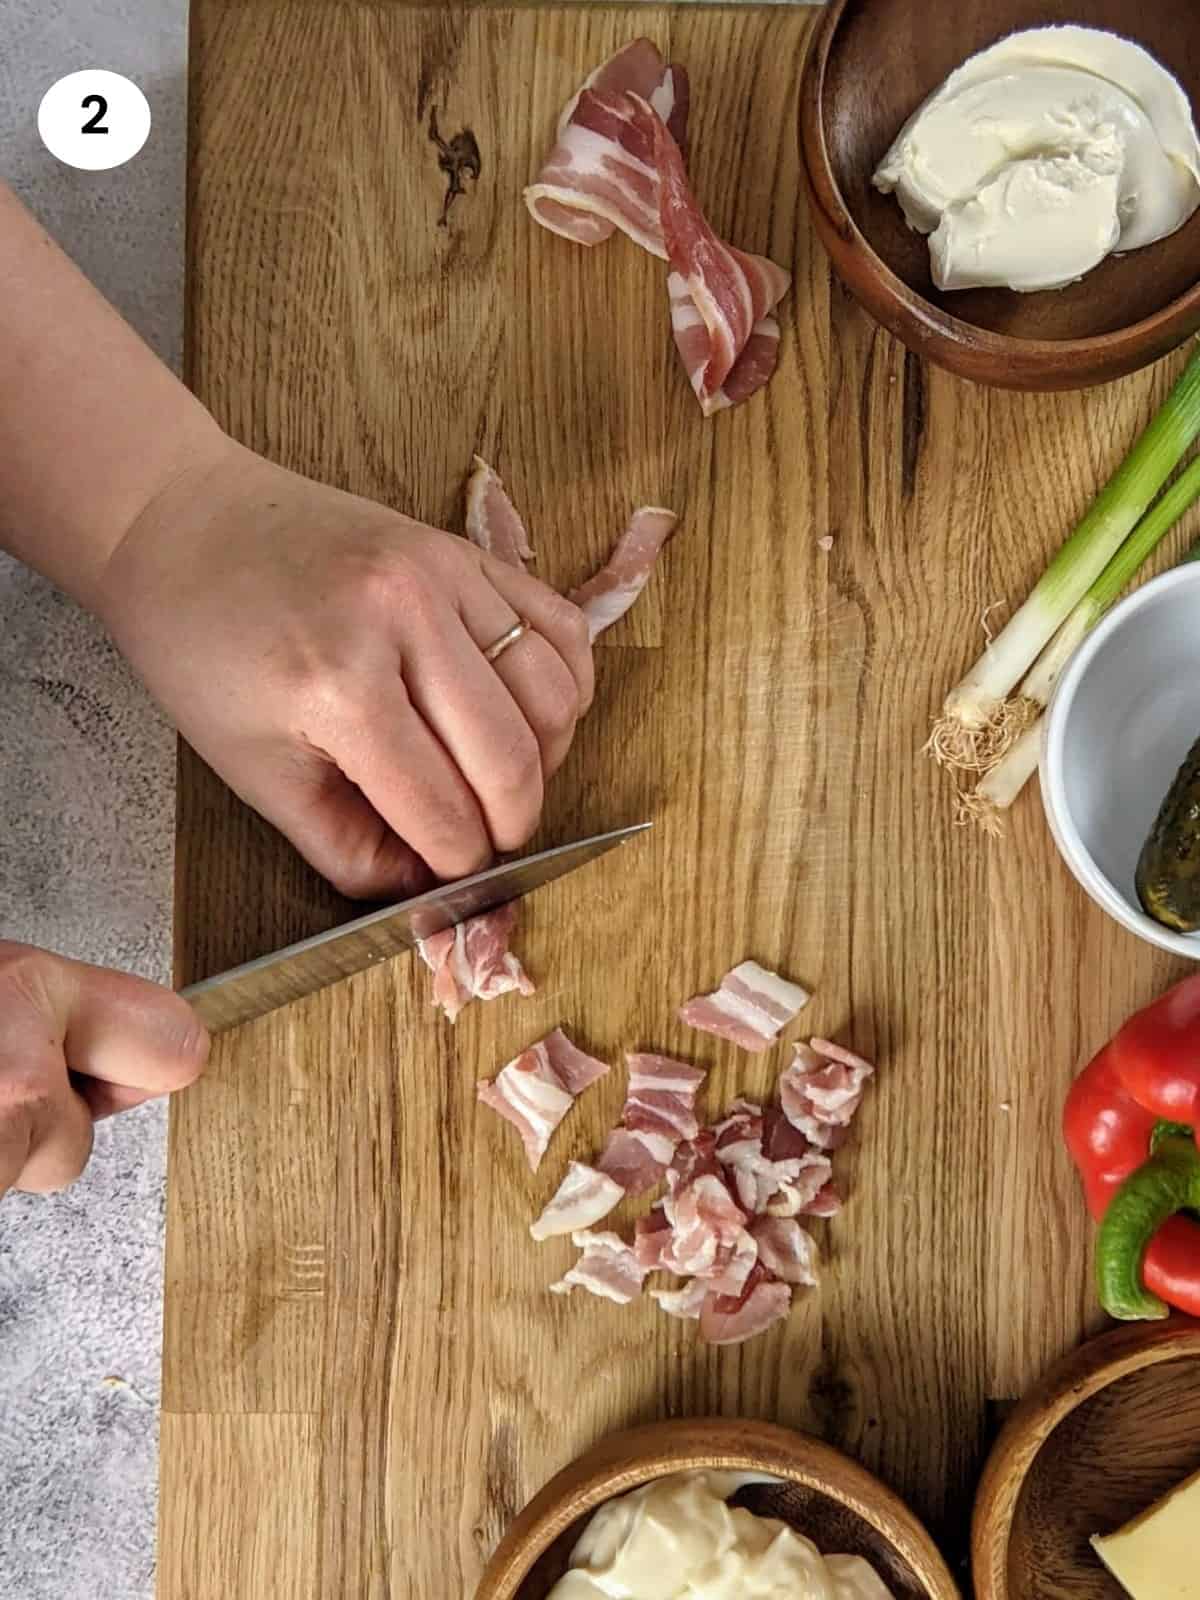 Cutting the bacon rashers into small pieces for the cauliflower salad.